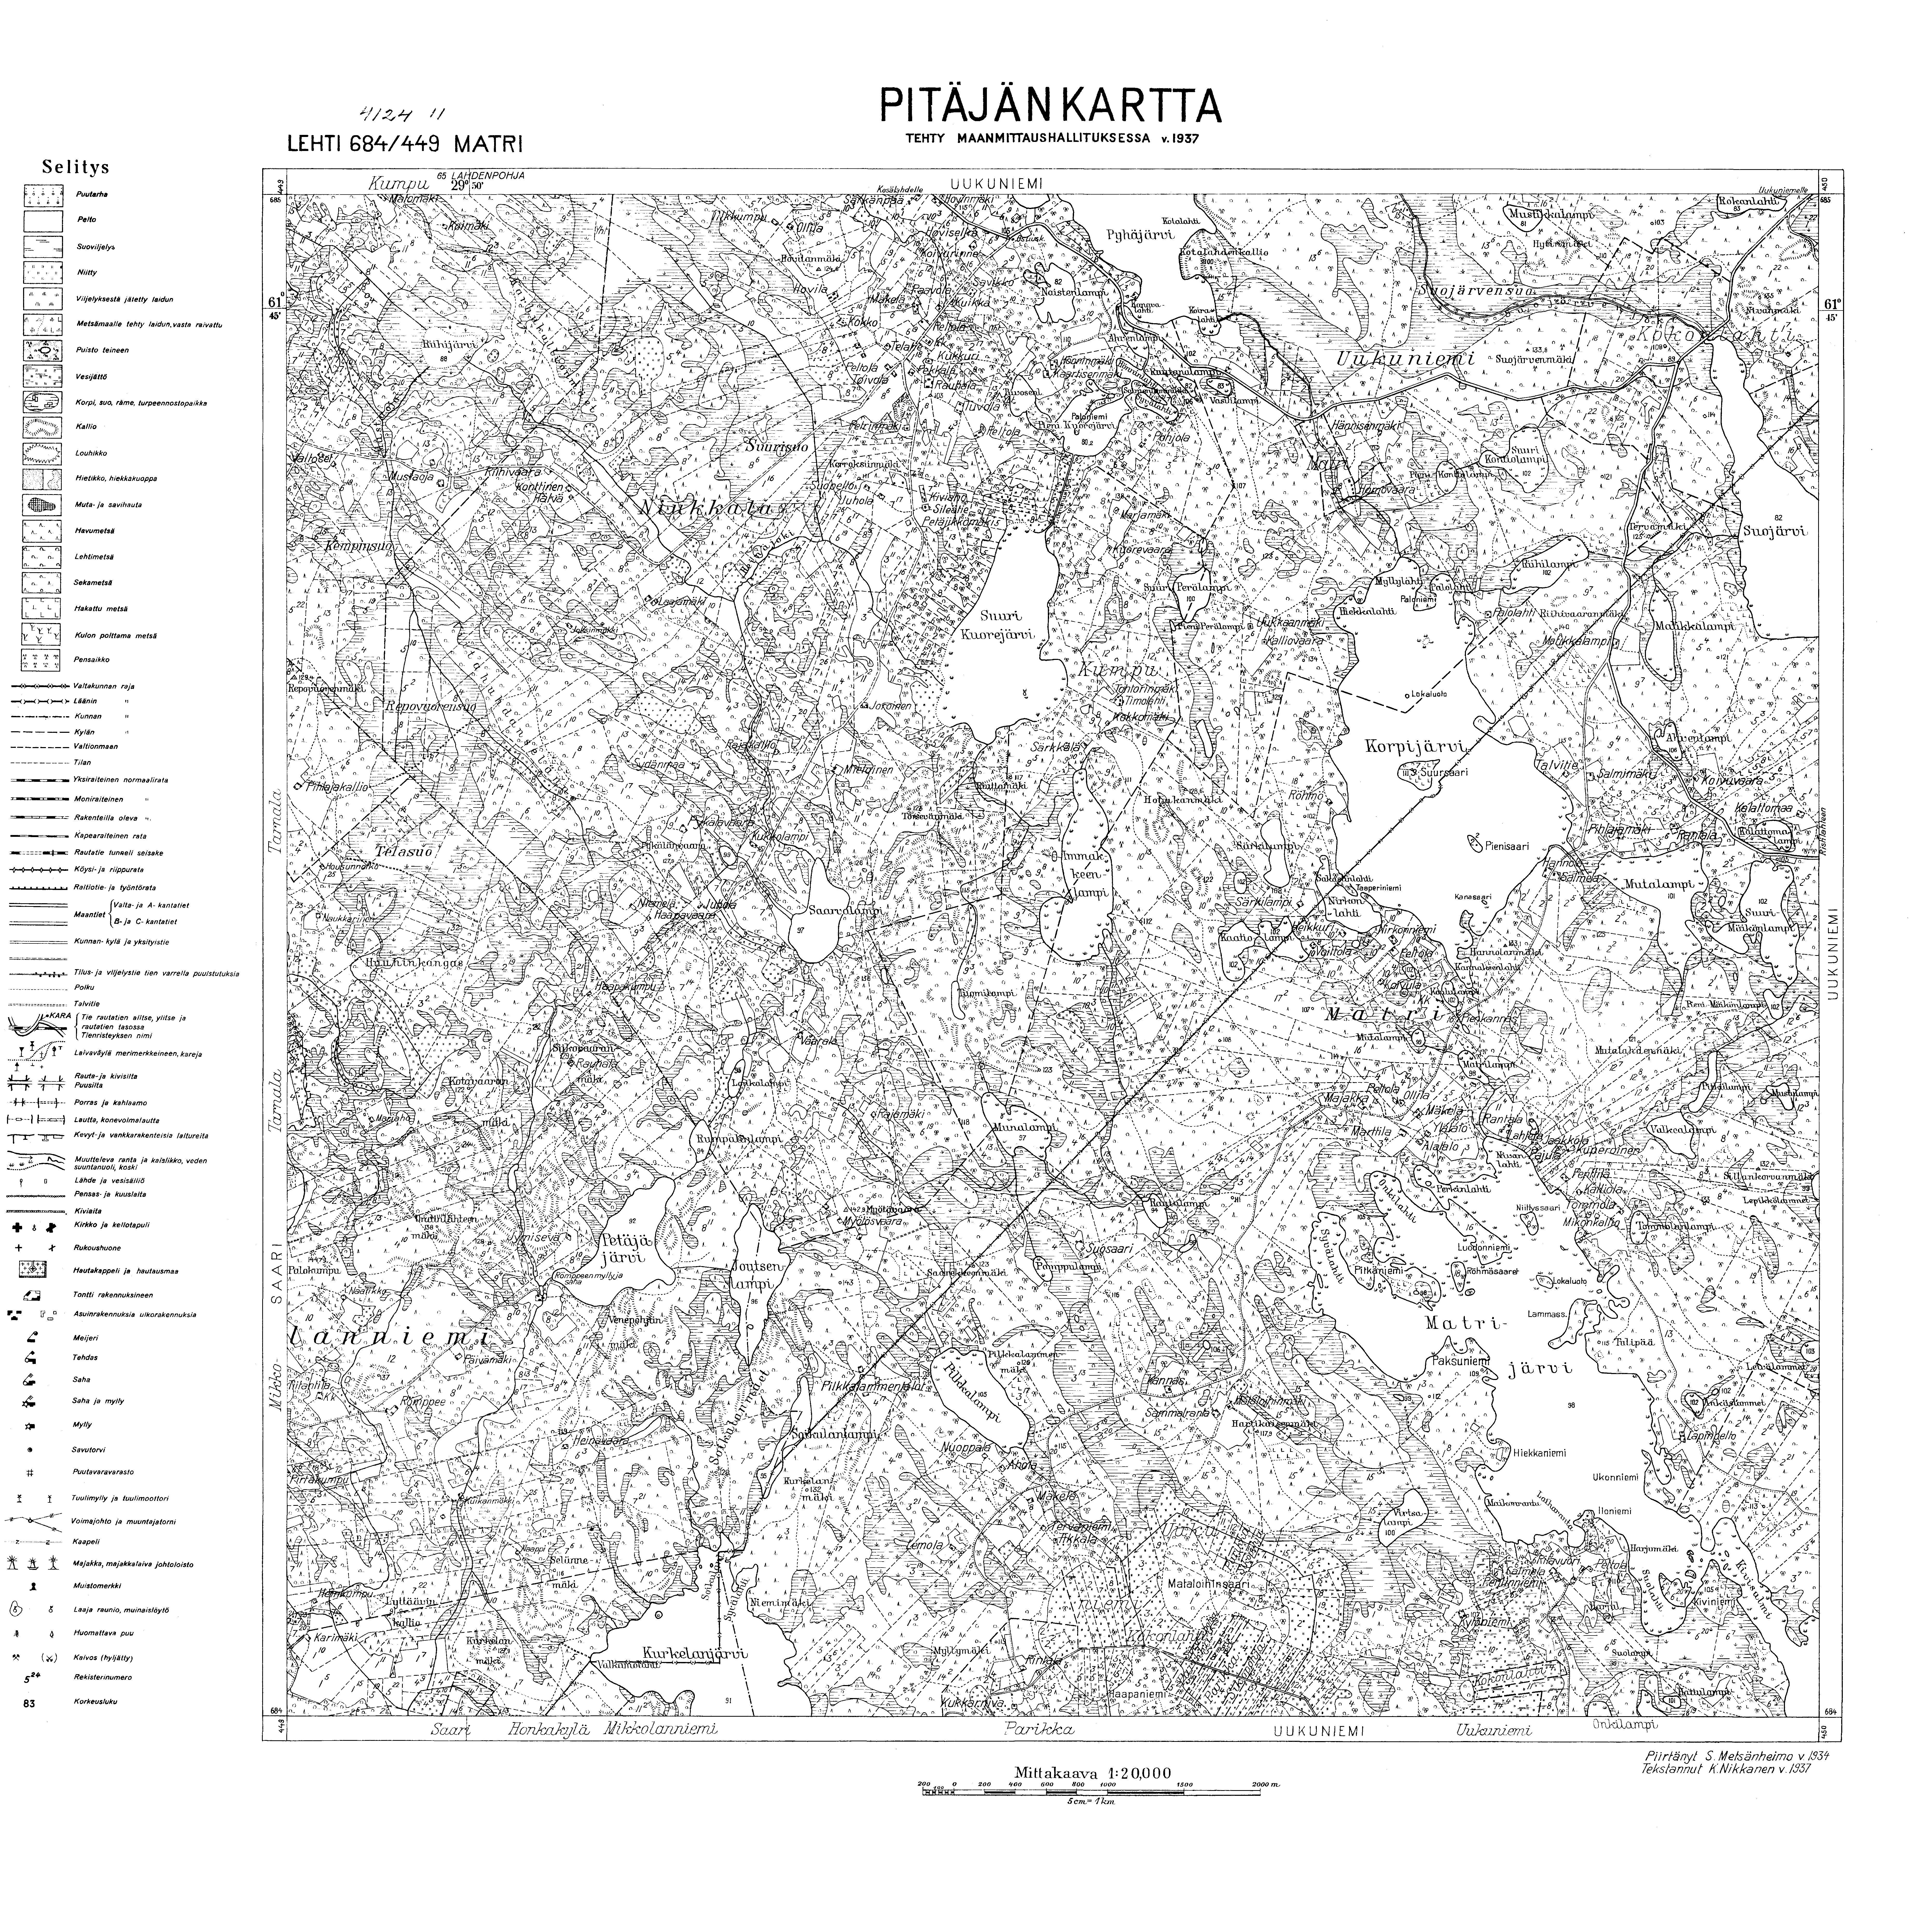 Matri. Pitäjänkartta 412411. Parish map from 1934. Use the zooming tool to explore in higher level of detail. Obtain as a quality print or high resolution image